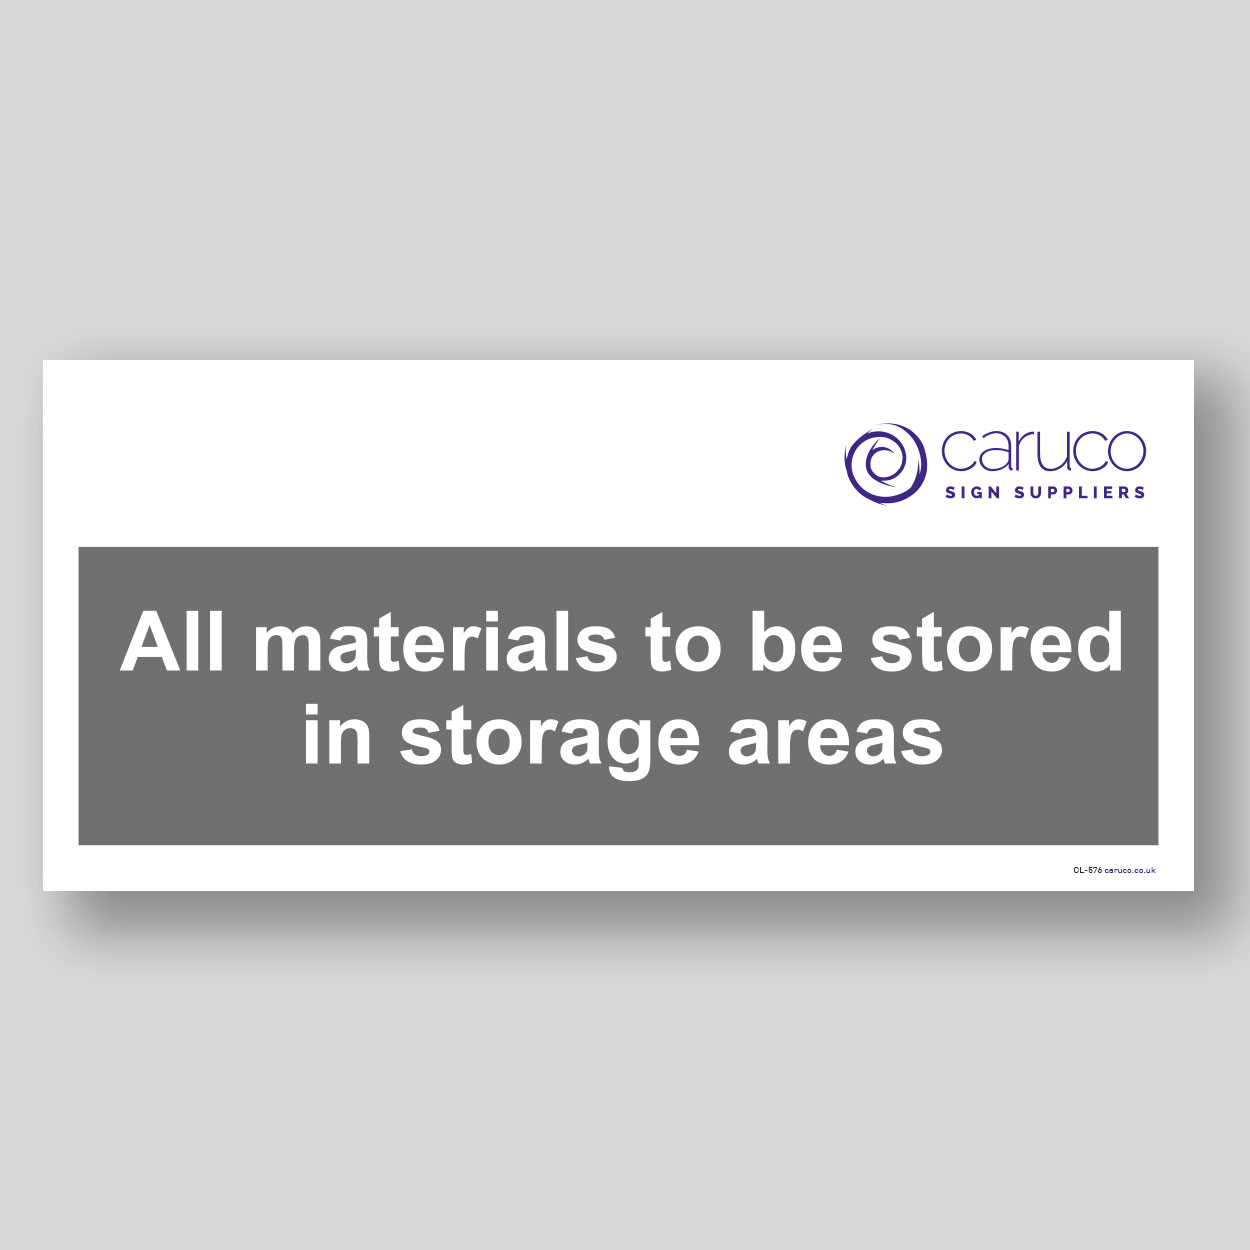 CL-576 All materials in storage areas